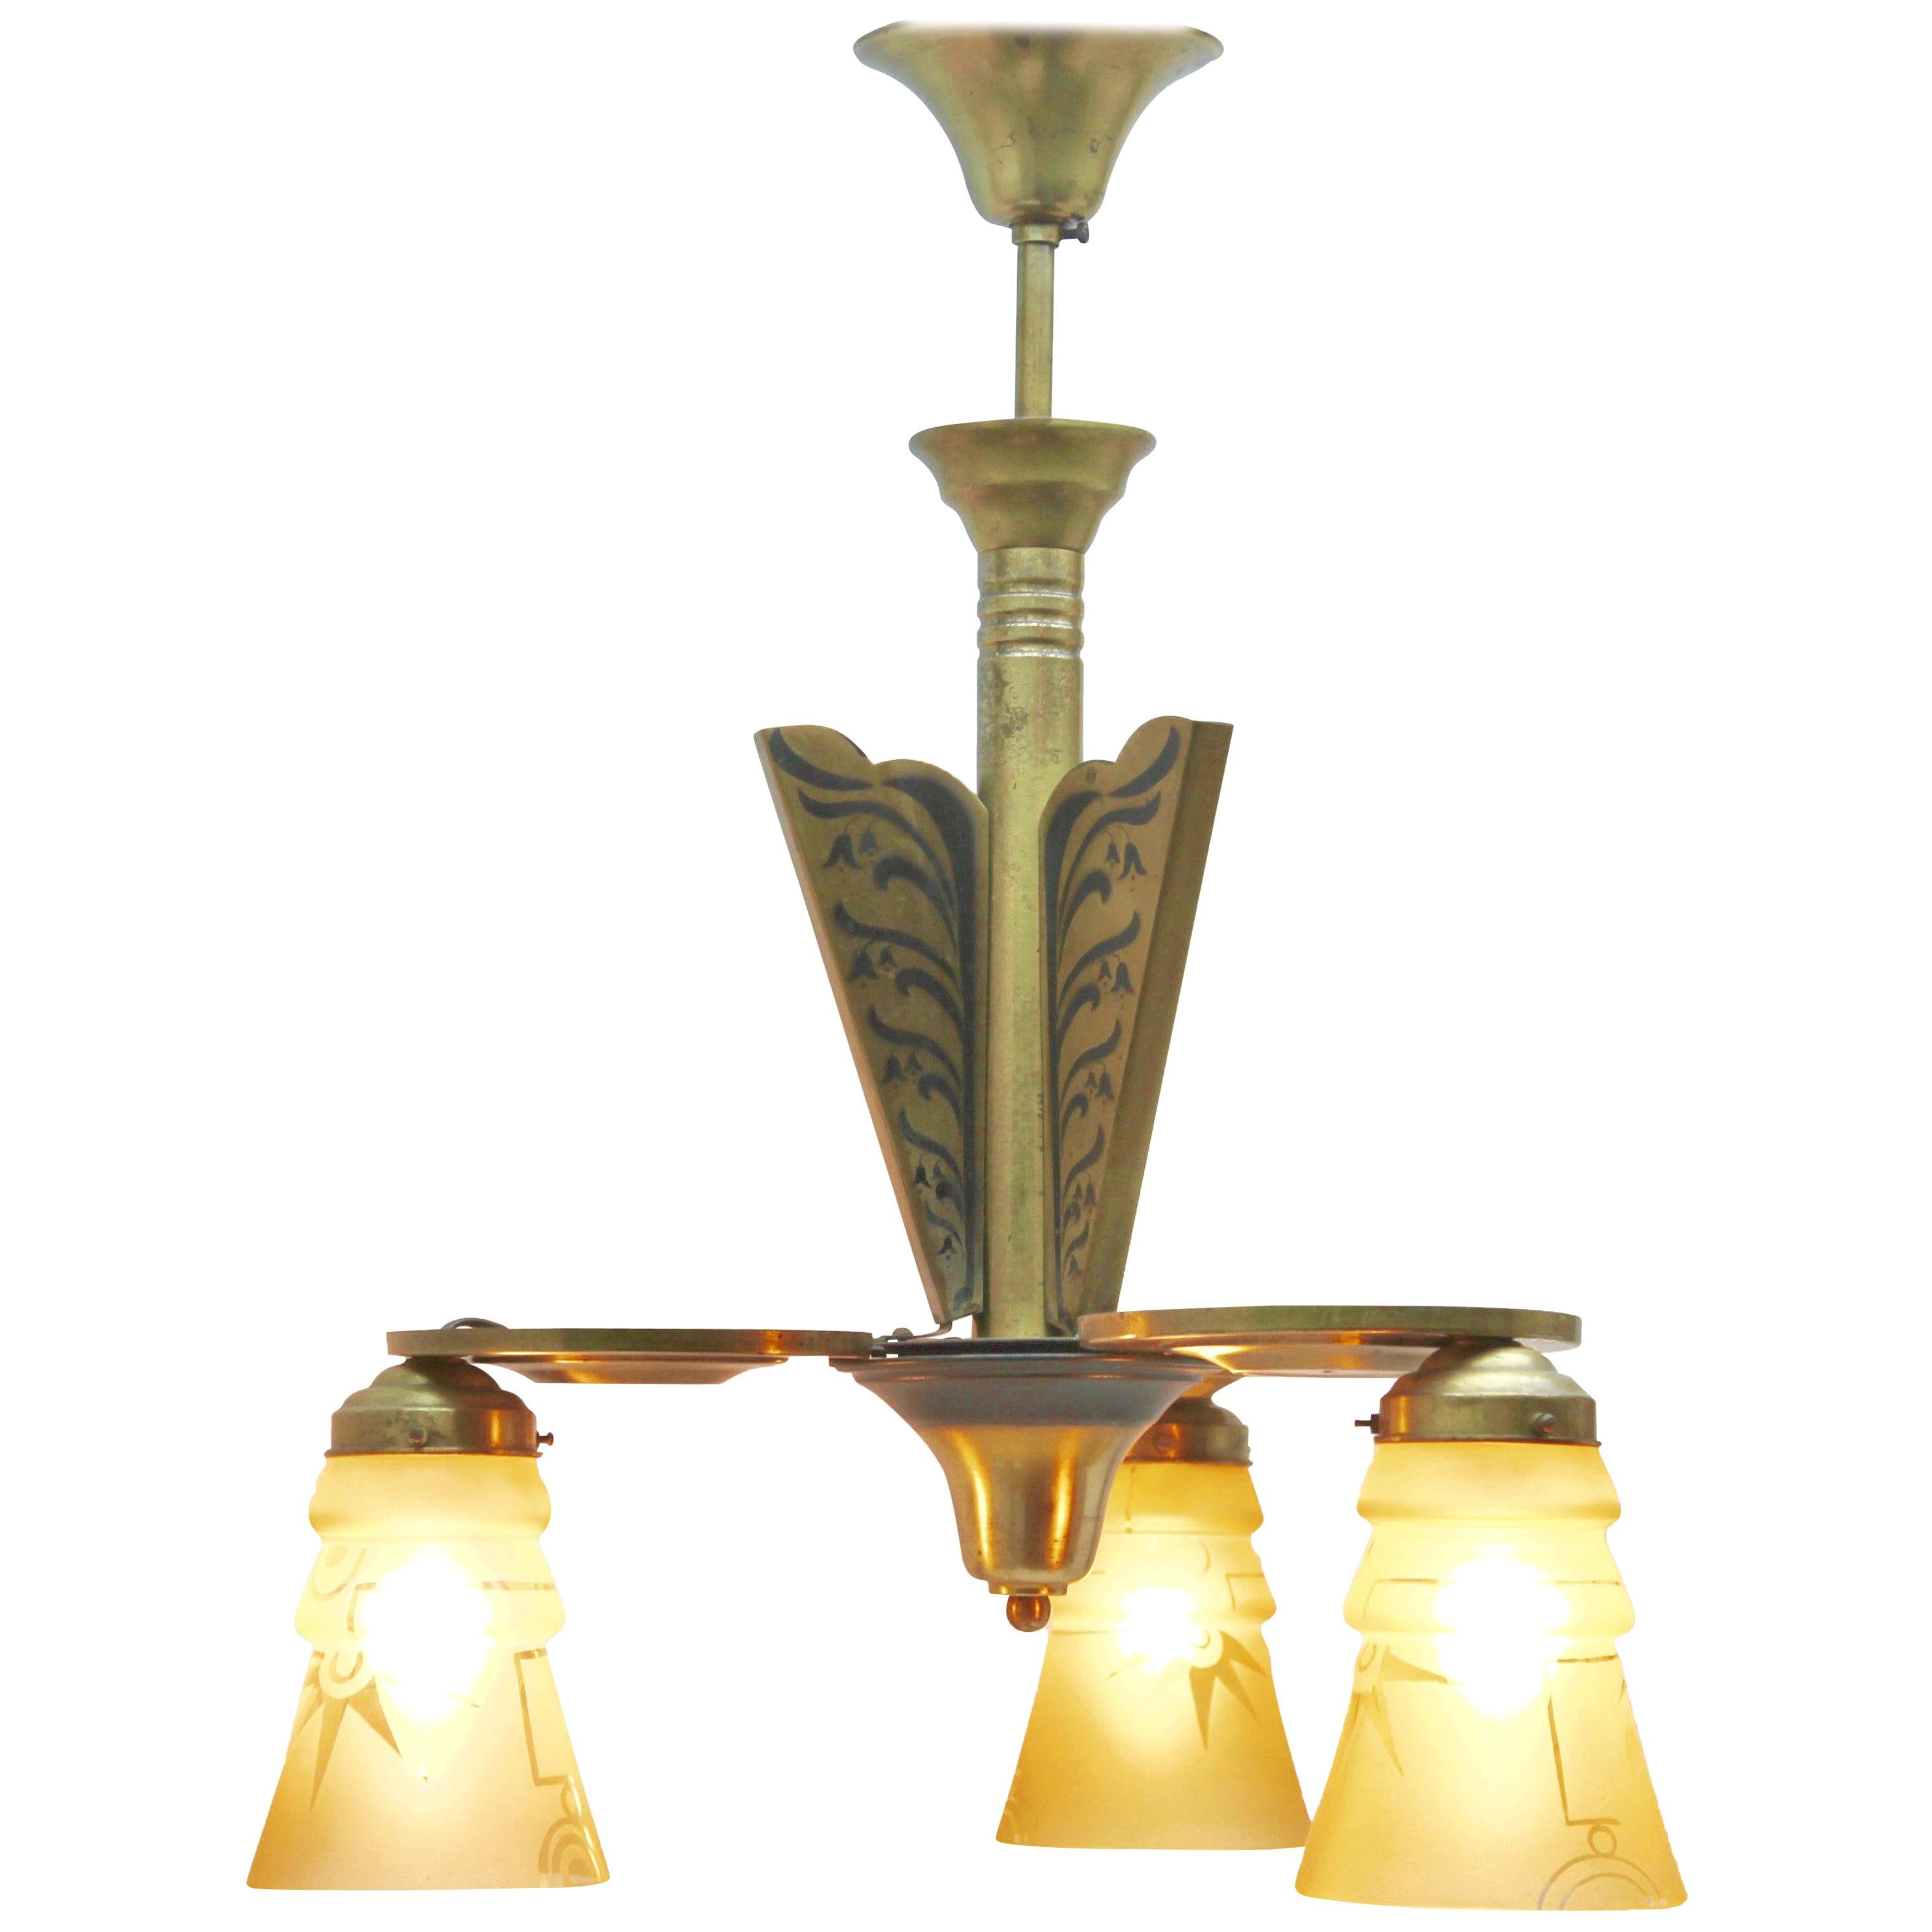 Art Deco Brass Chandelier Three Arms Glass Lampshades Whit Pattern For Sale